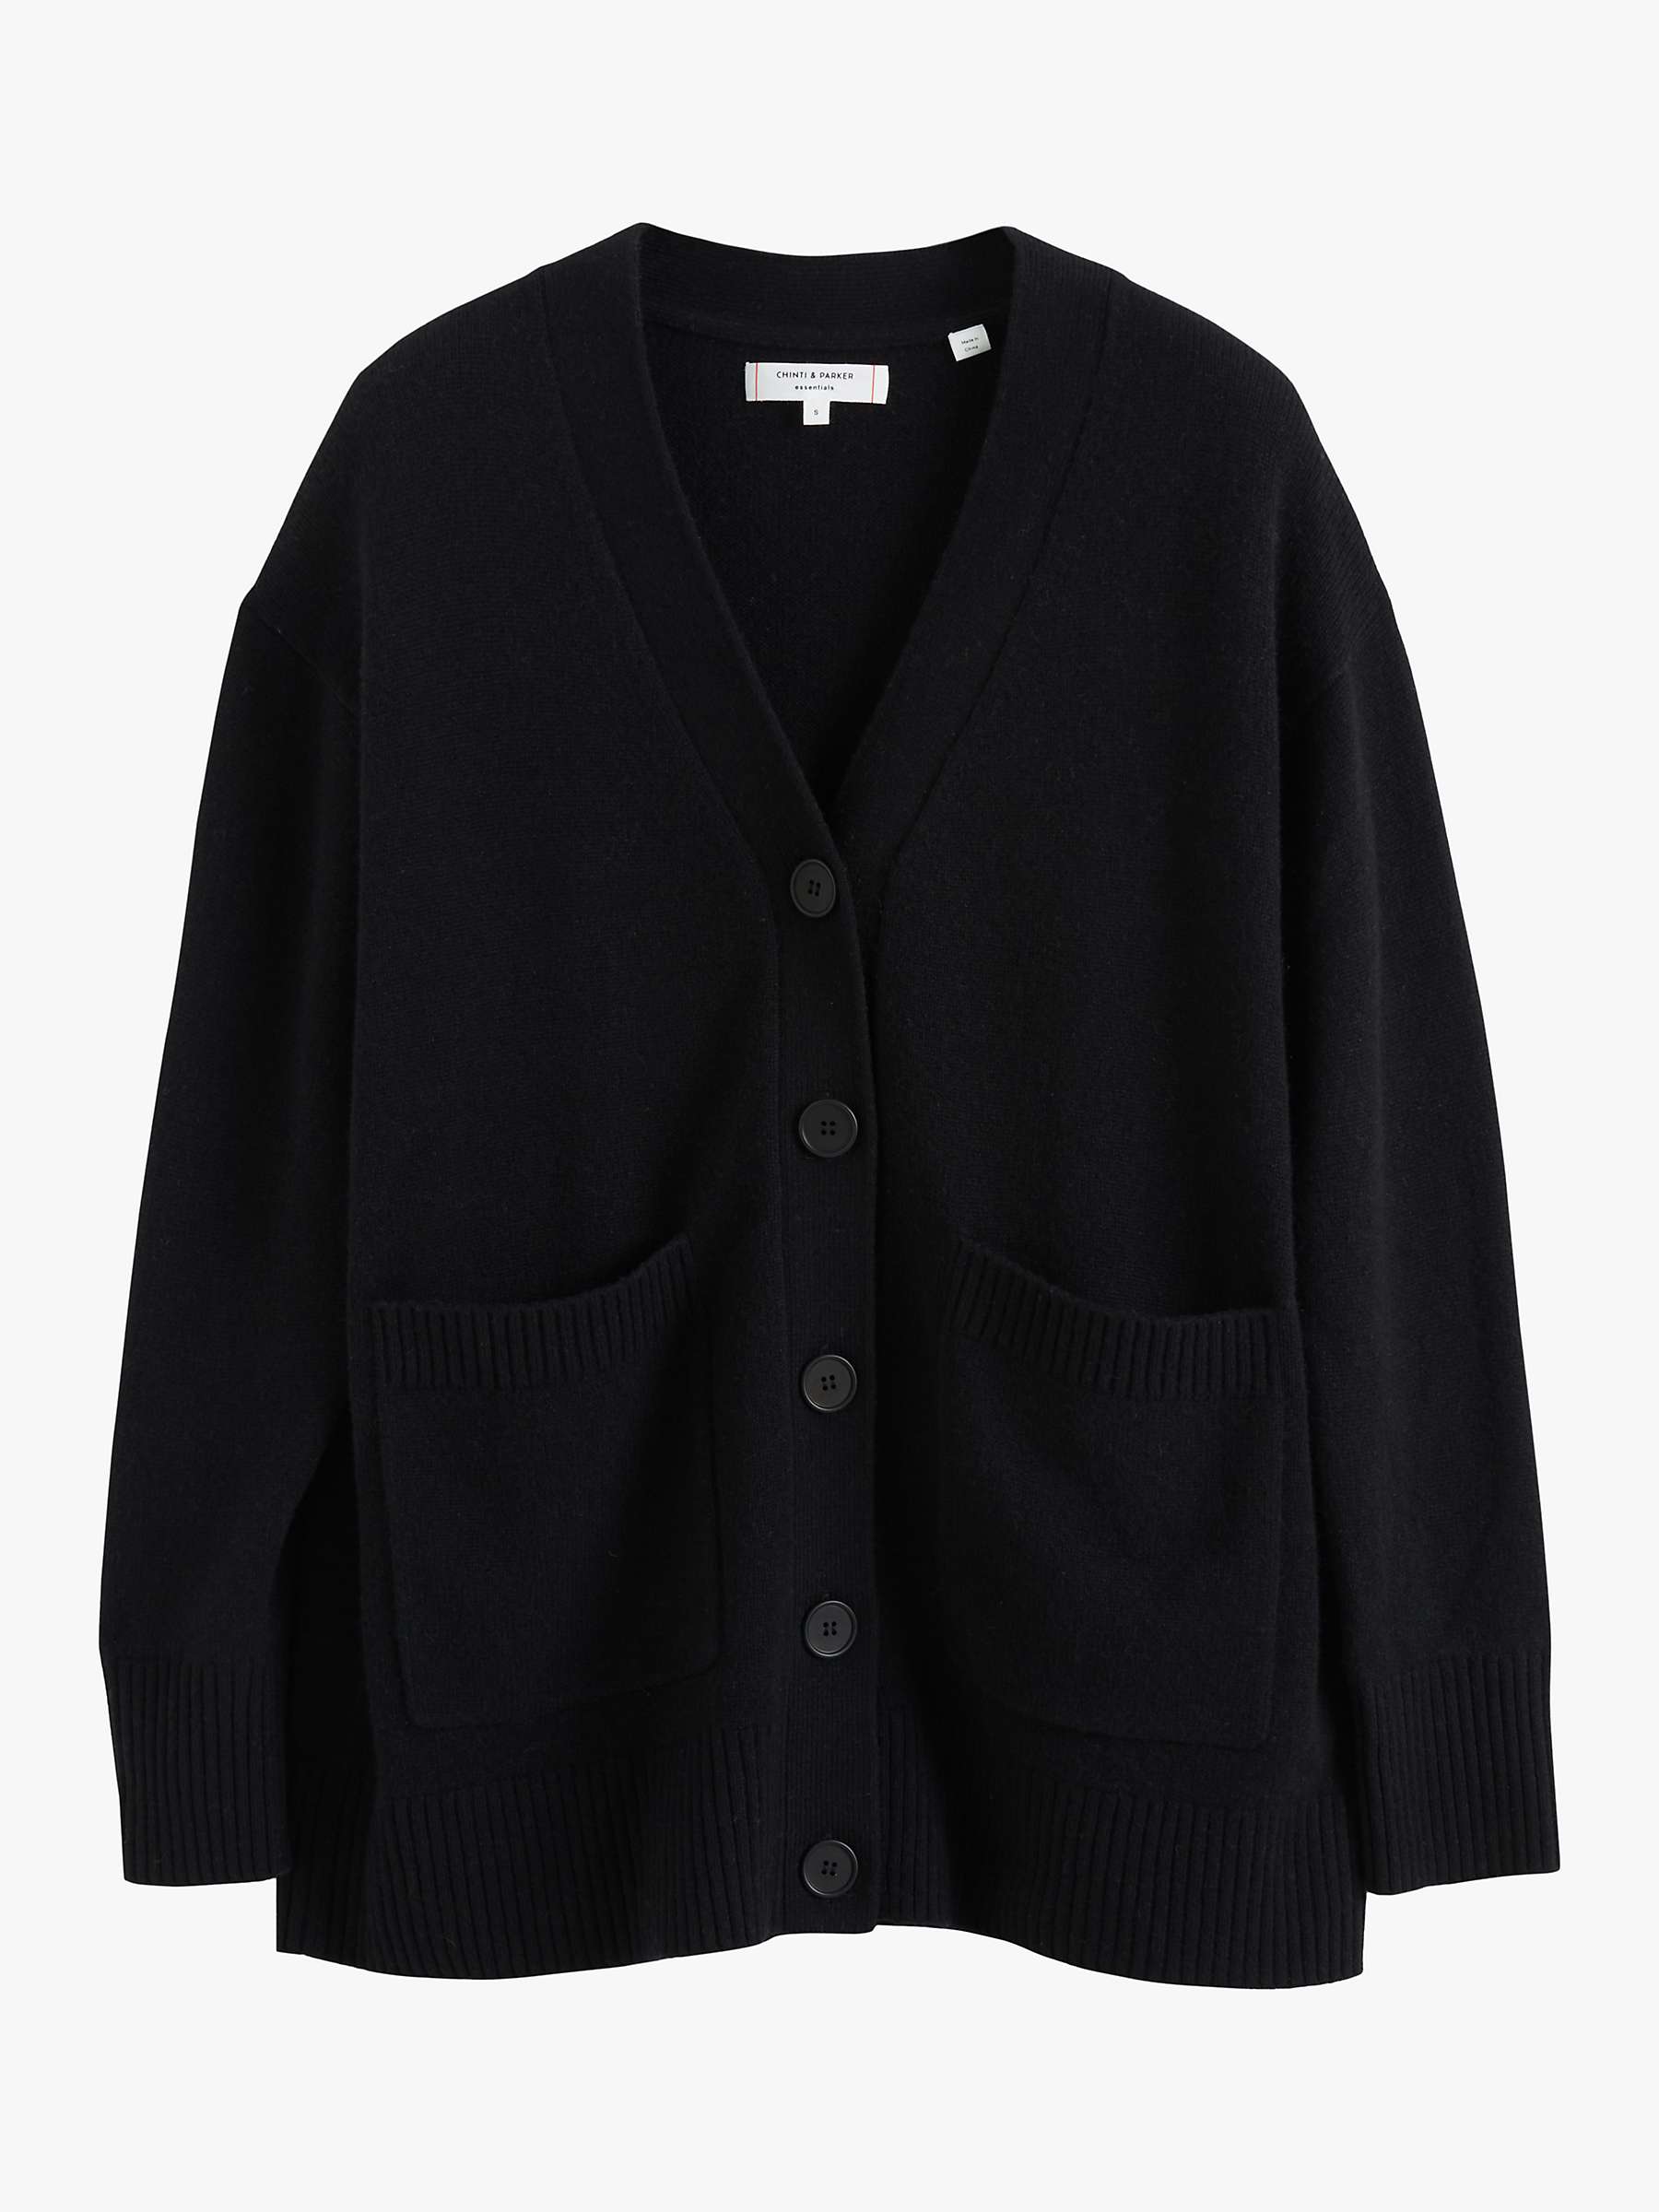 Buy Chinti & Parker Cashmere Chunky Cardigan Online at johnlewis.com